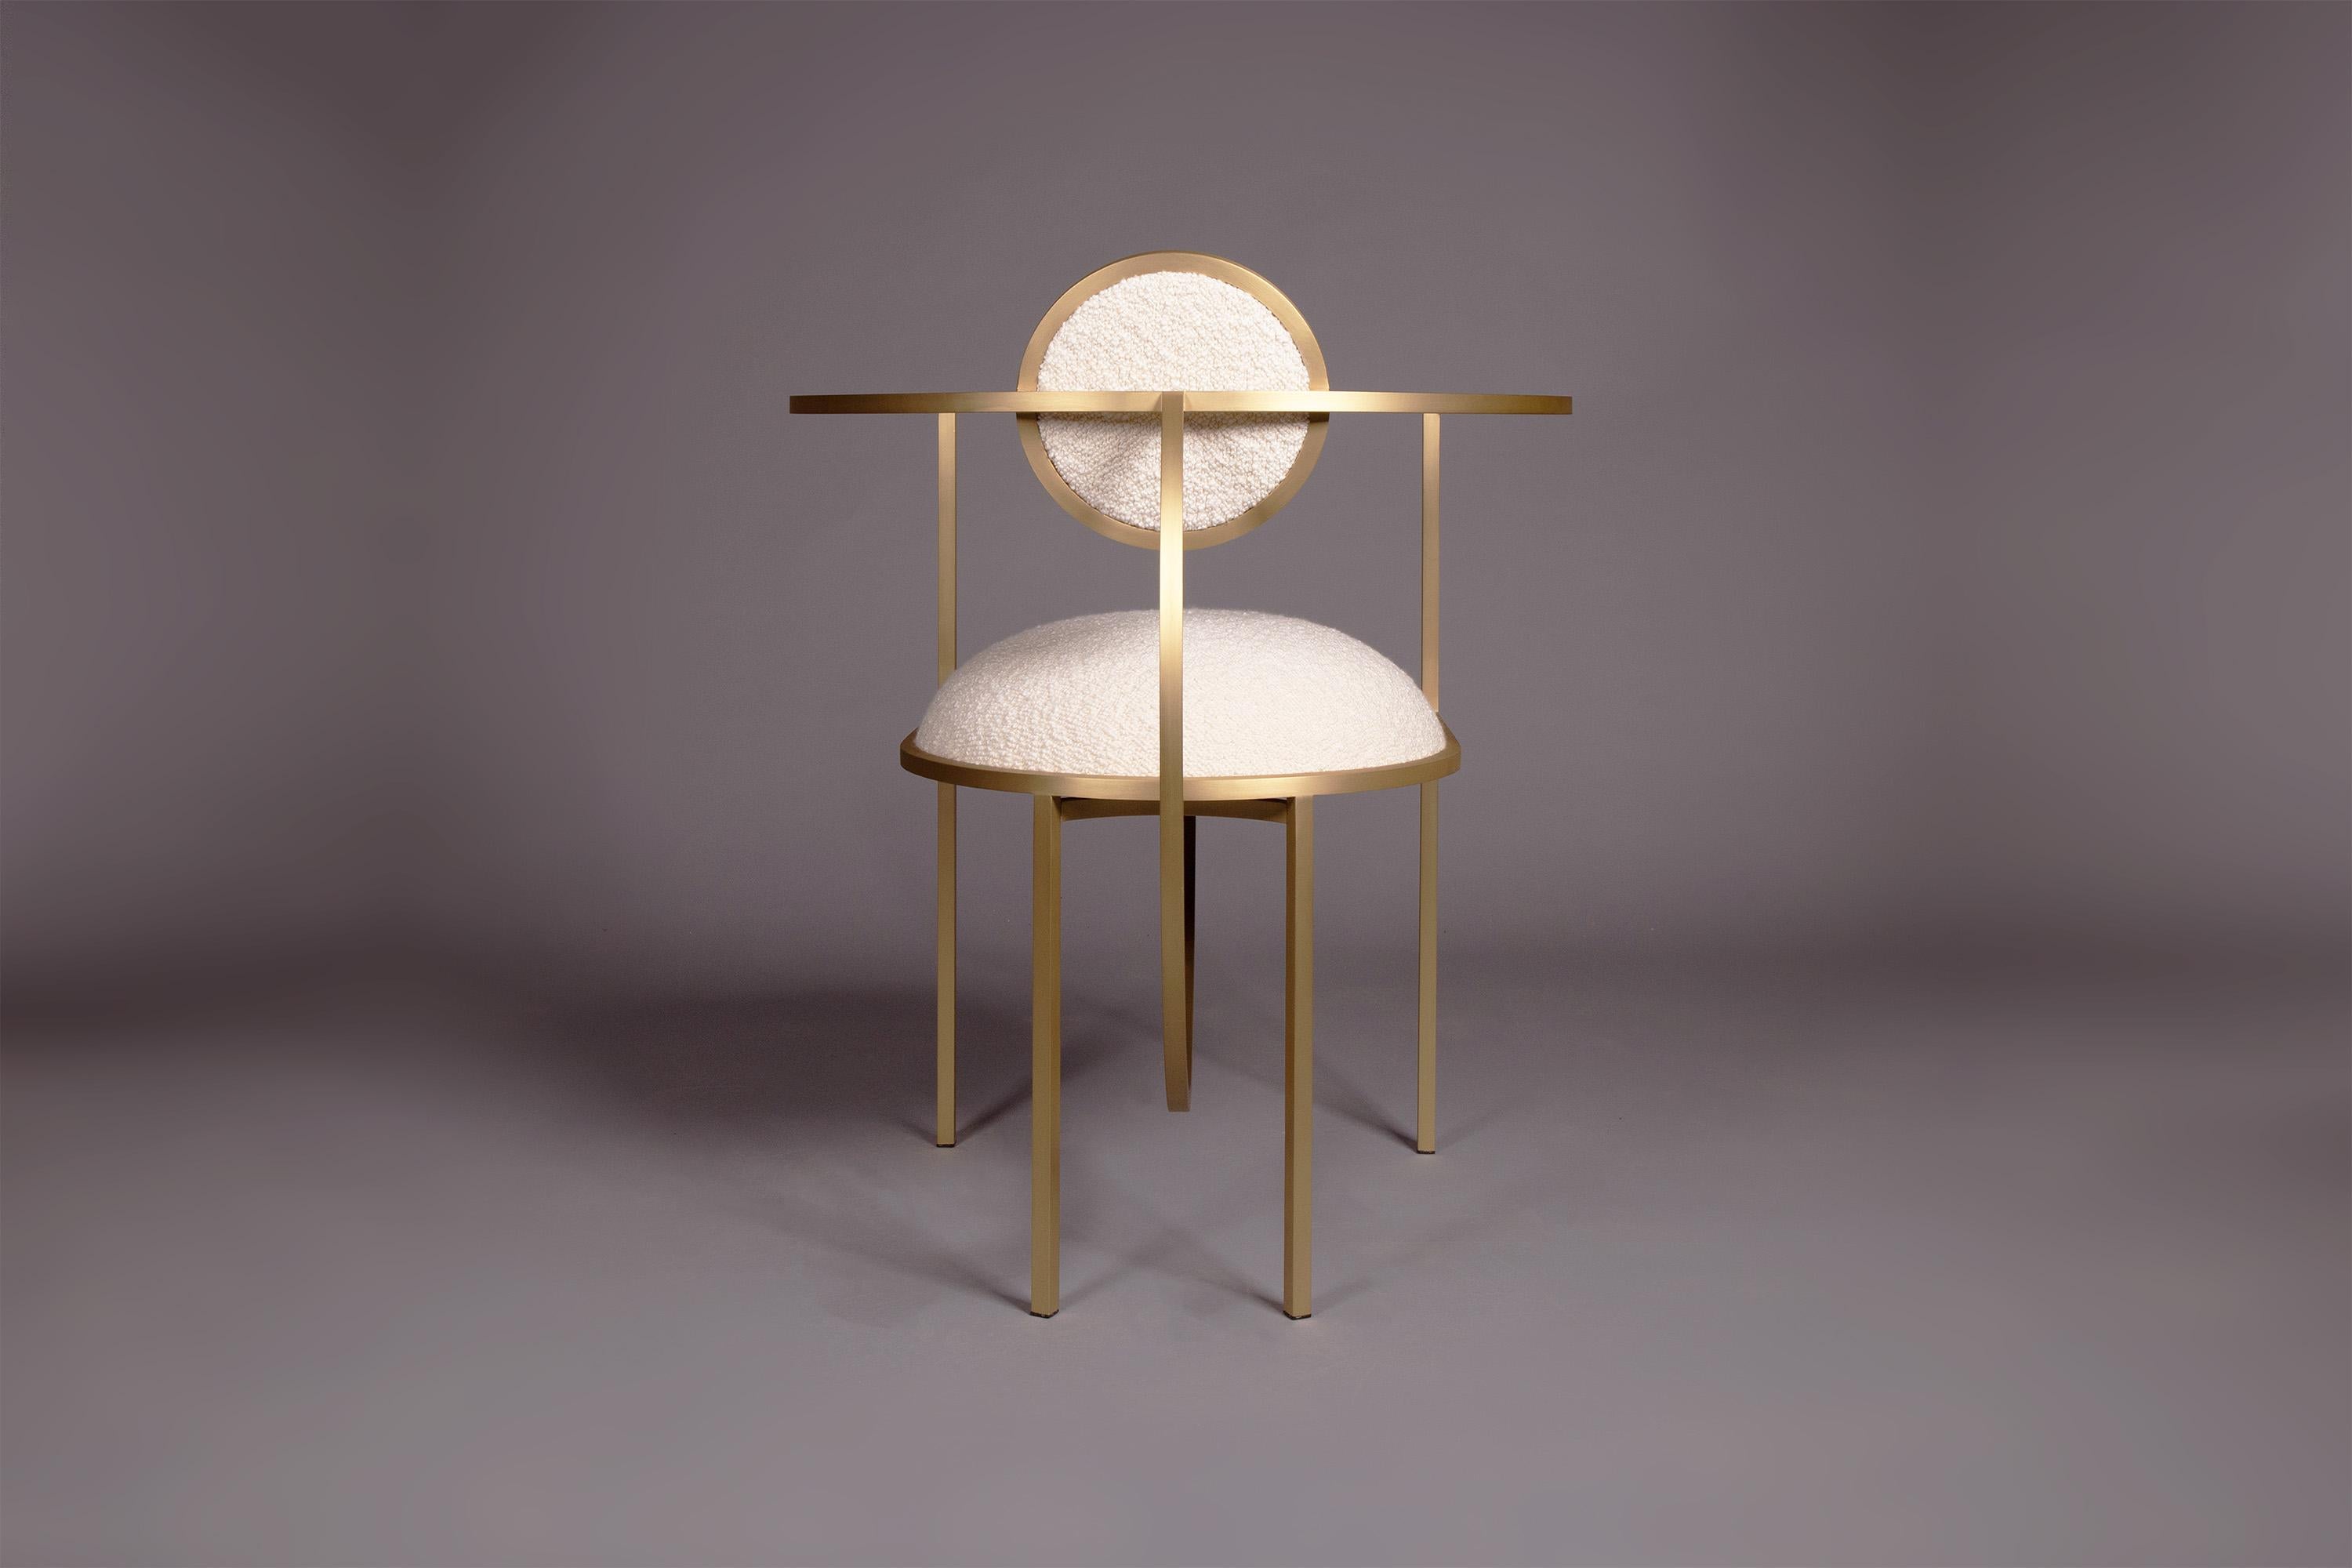 Lunar Chair in Cream Boucle Wool Fabric and Brushed Brass, by Lara Bohinc In New Condition For Sale In Holland, AMSTERDAM